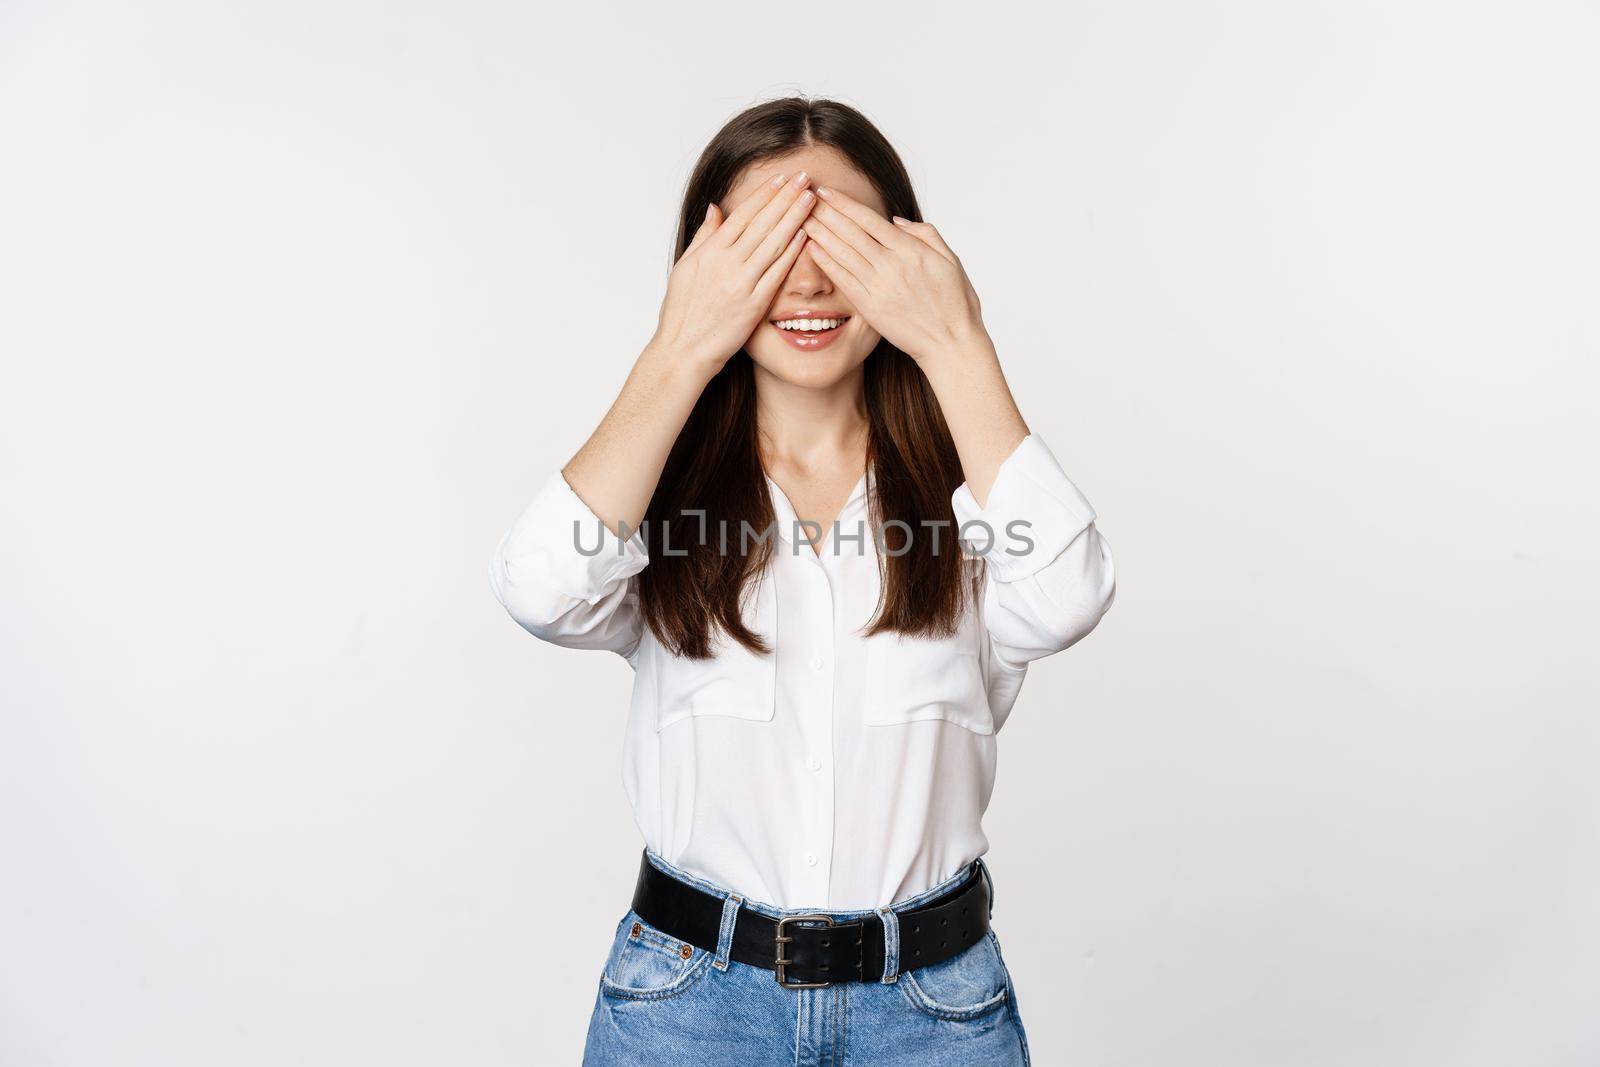 Smiling happy woman waiting for surprise, shut eyes with hands, standing blindsided against white background.